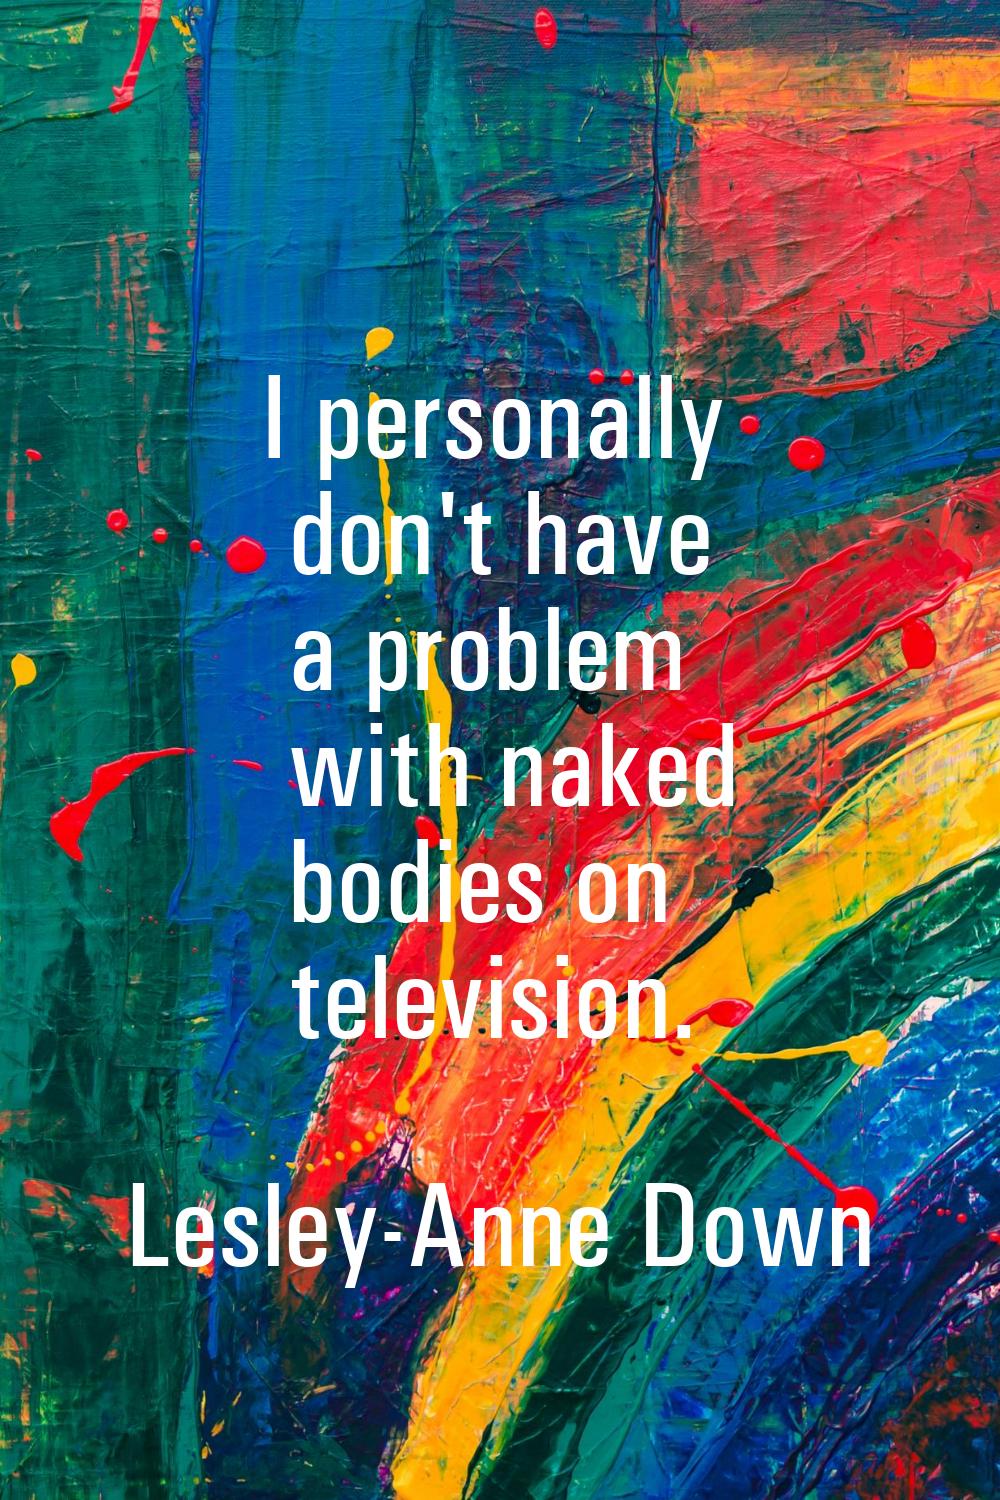 I personally don't have a problem with naked bodies on television.